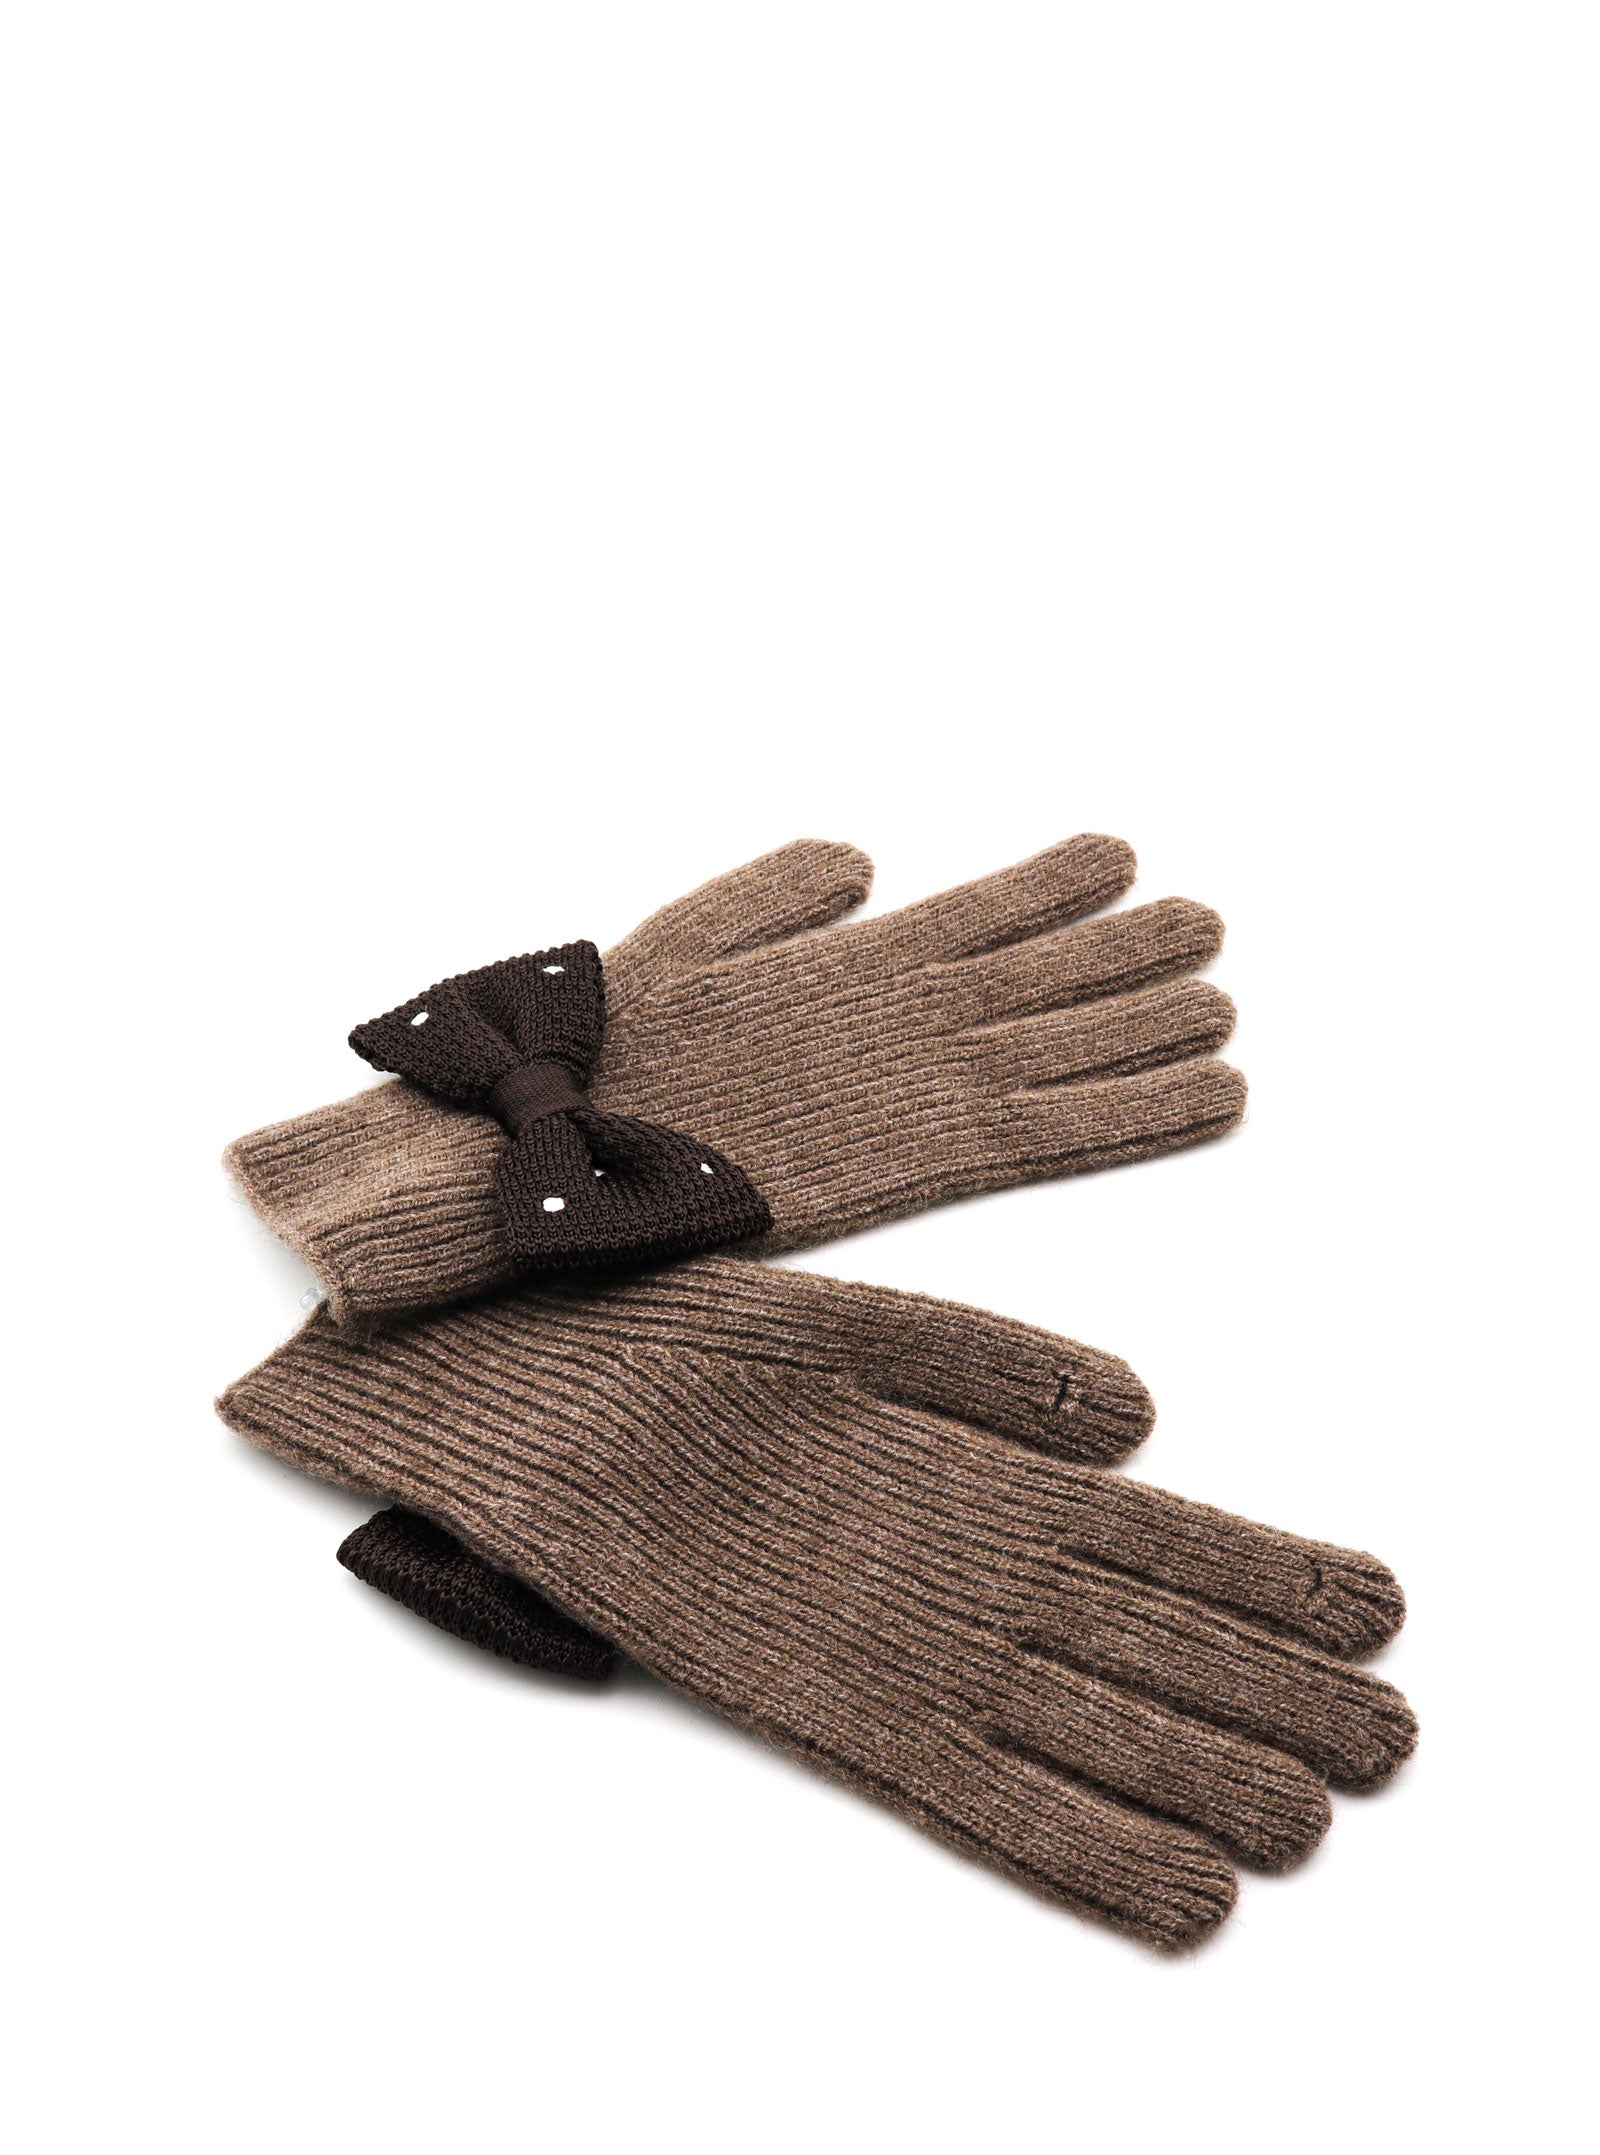 PIPIT BOW GLOVES